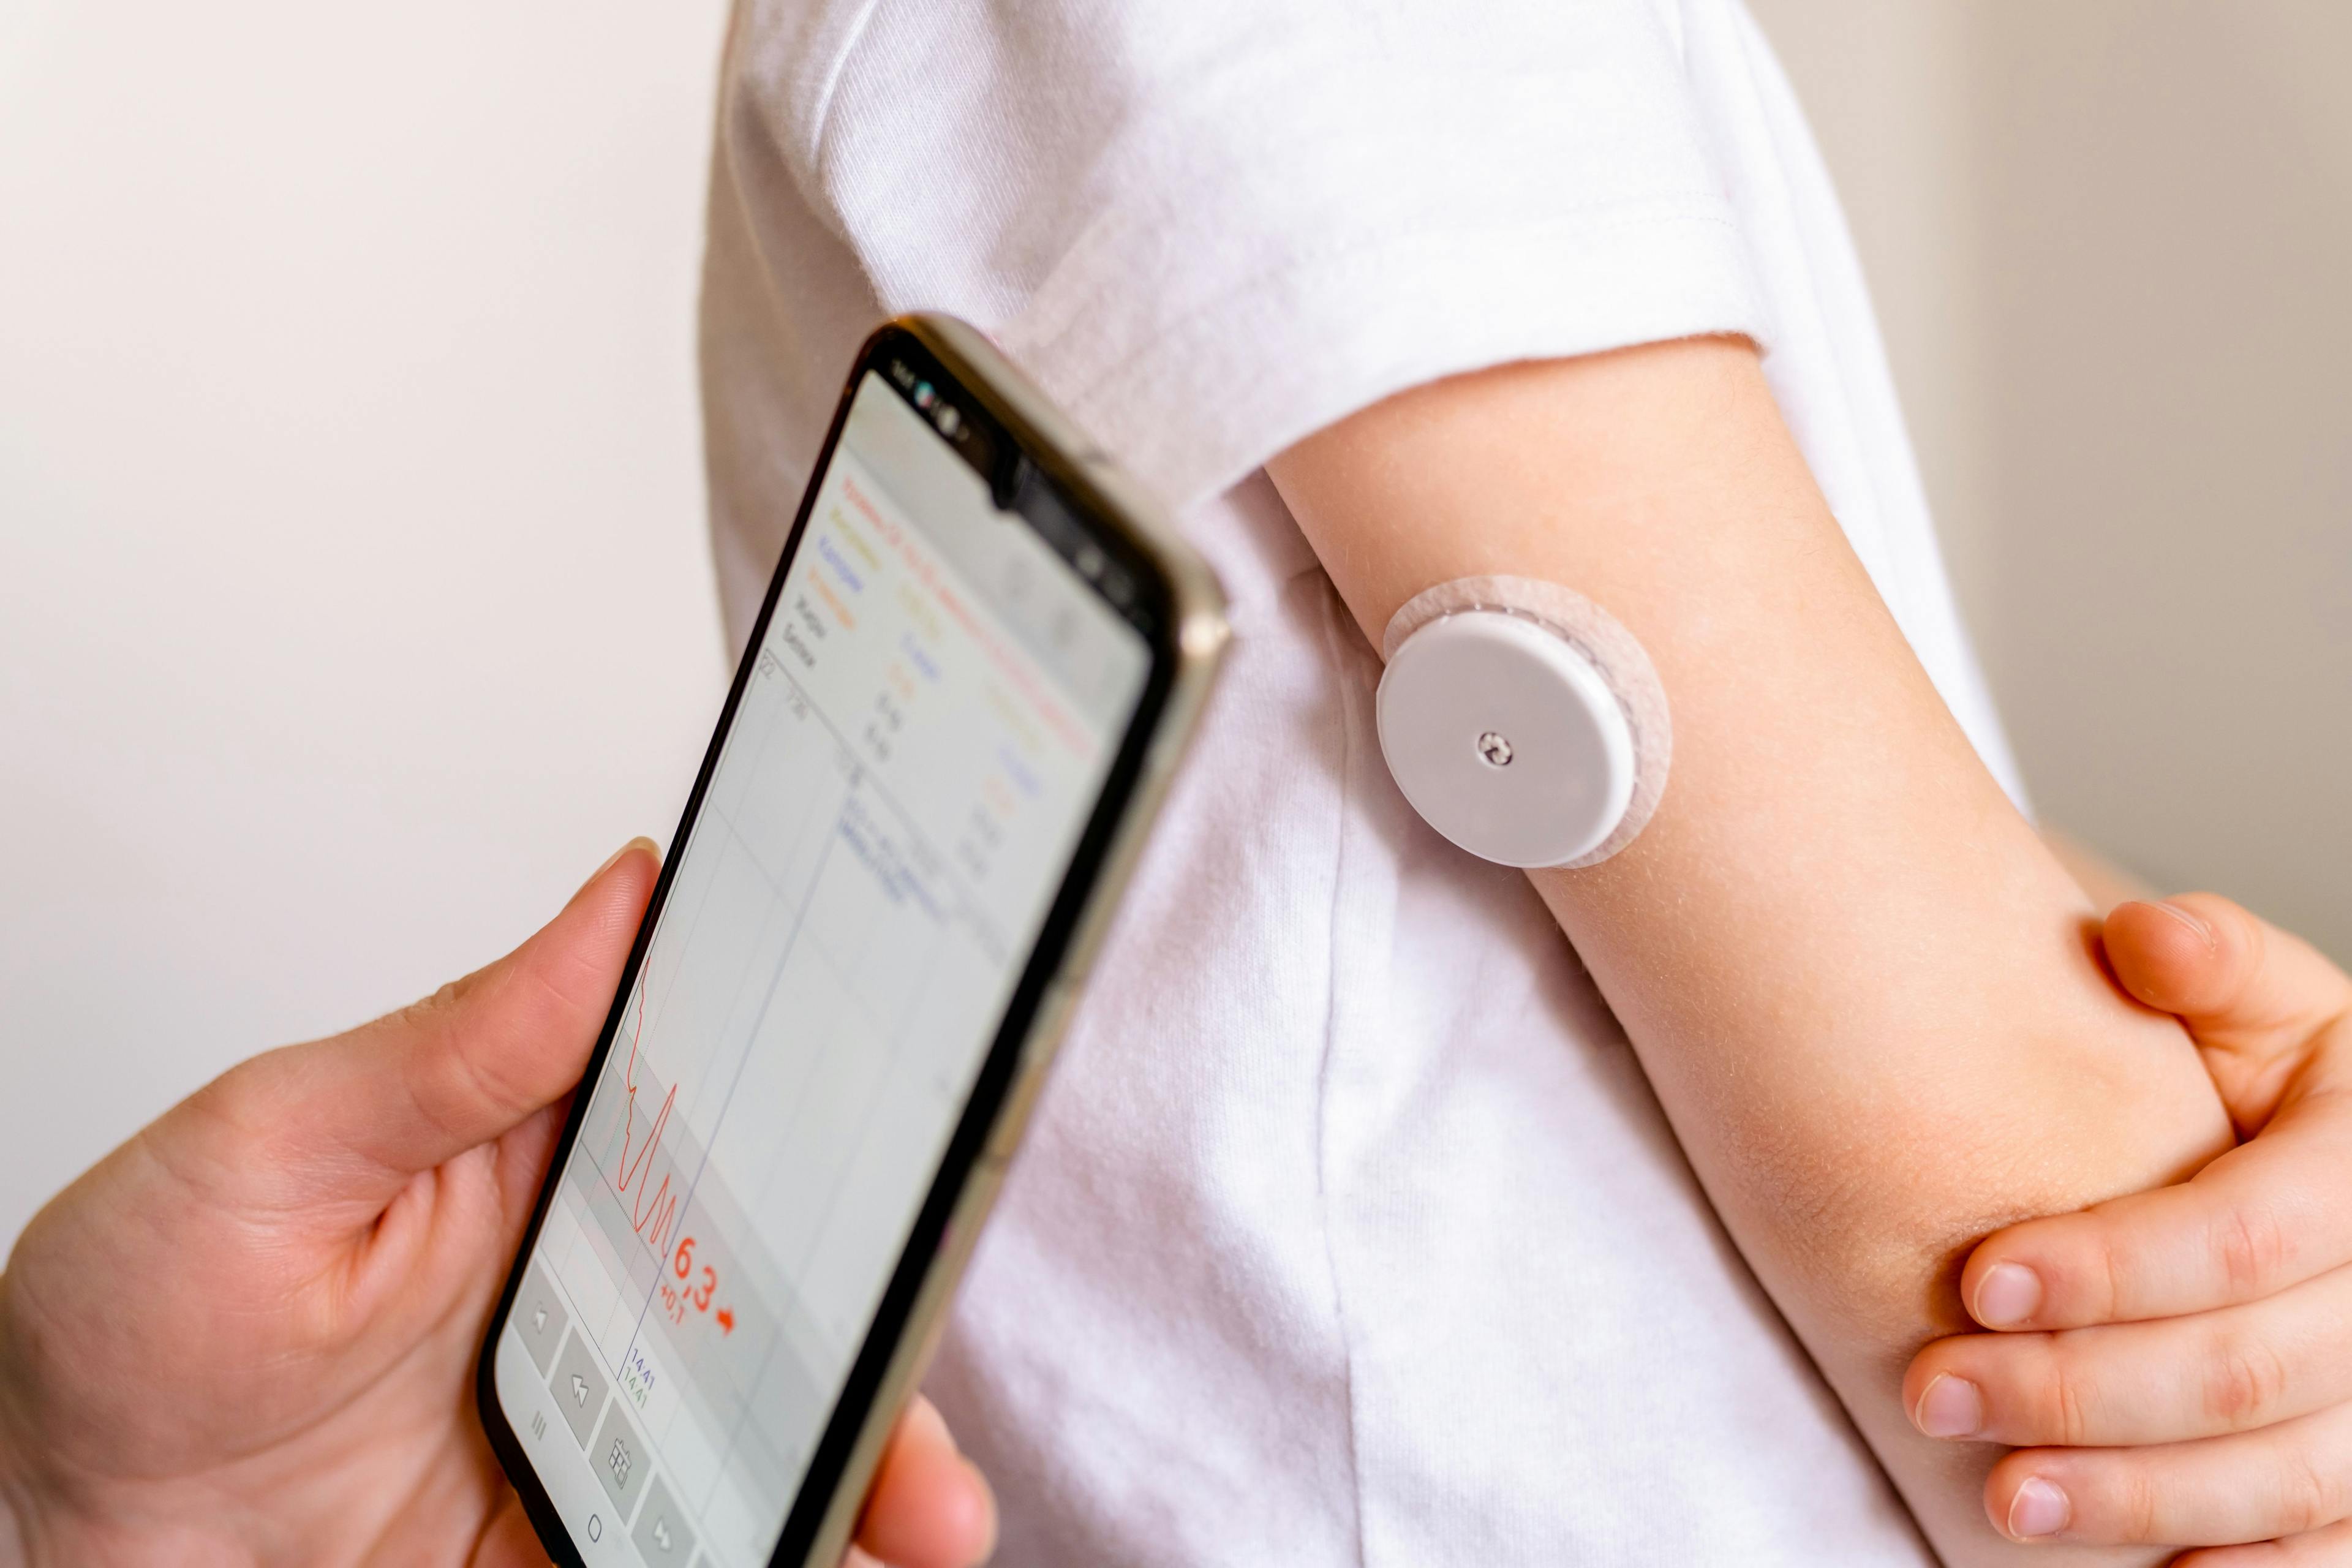 Type 1 Diabetes Management Could Improve With Use of Do-It-Yourself CGM